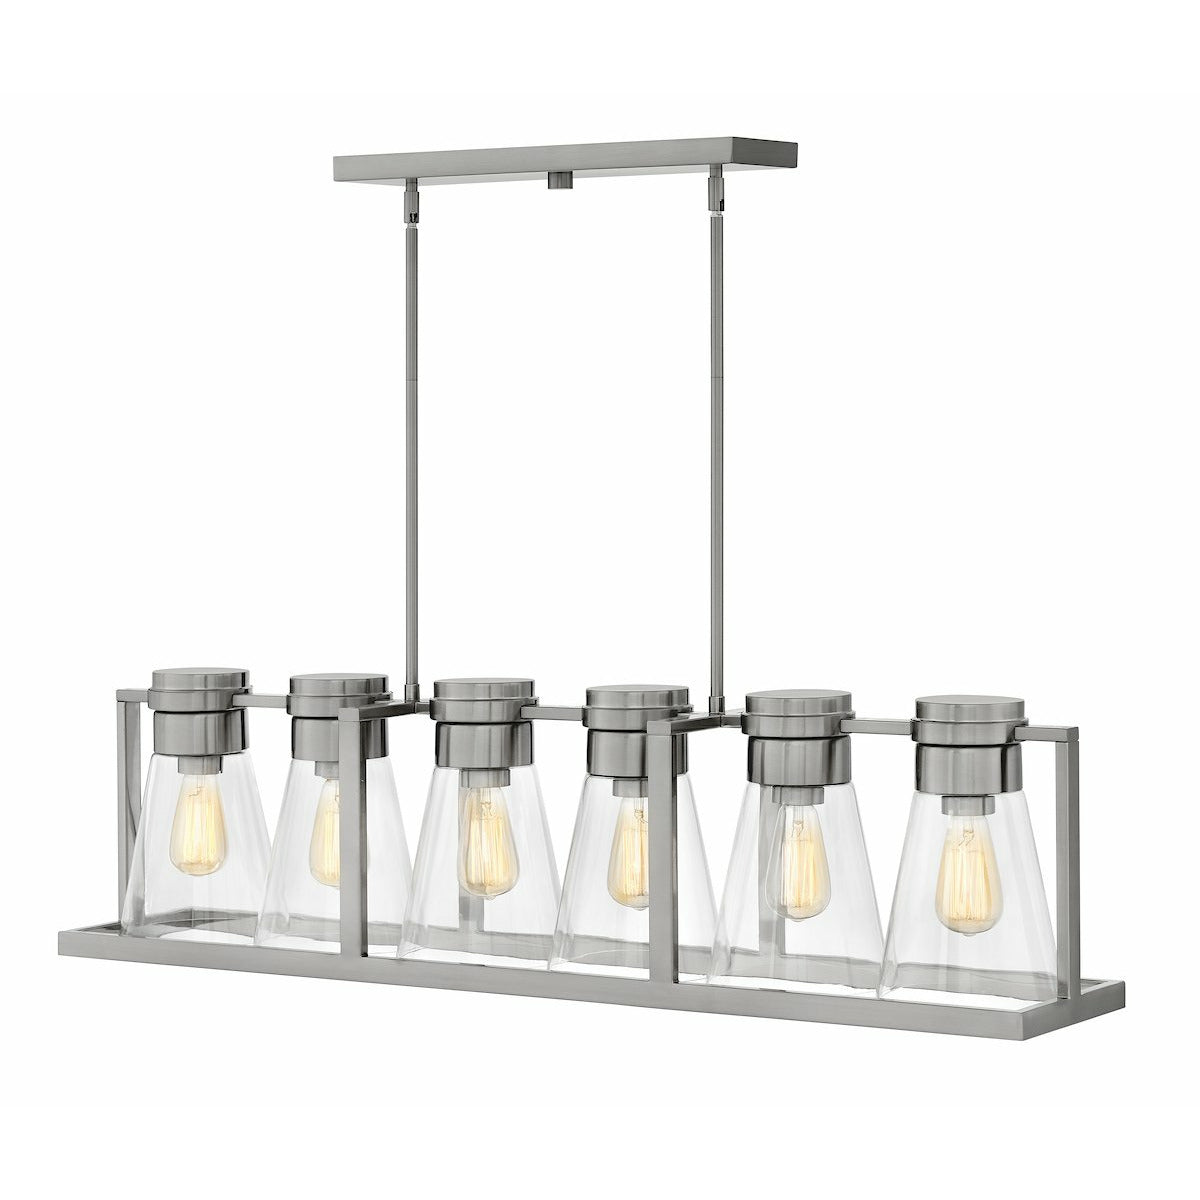 Refinery Linear Suspension Brushed Nickel with Clear glass